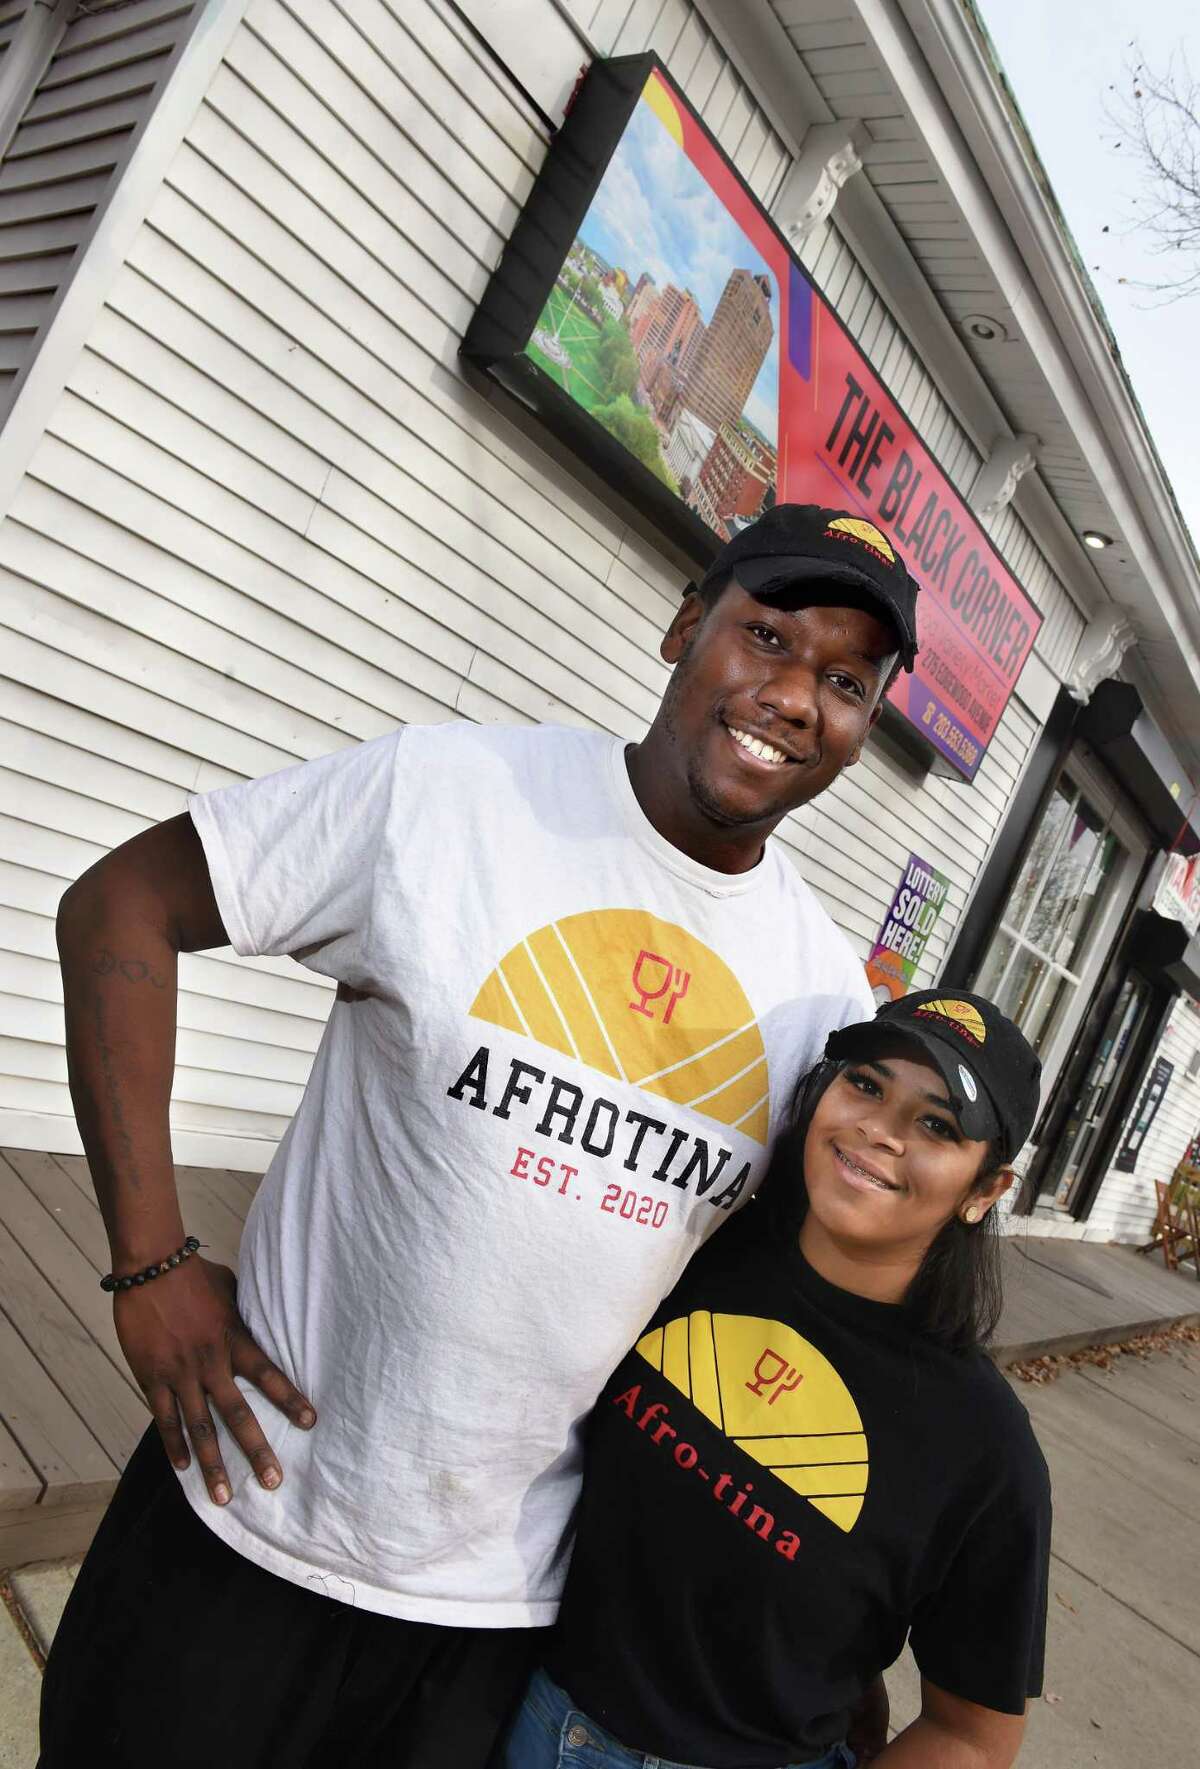 Ohioma Odihirin, left, and his wife, Eternaty, are photographed in front of the Black Corner store on Edgewood Avenue in New Haven.